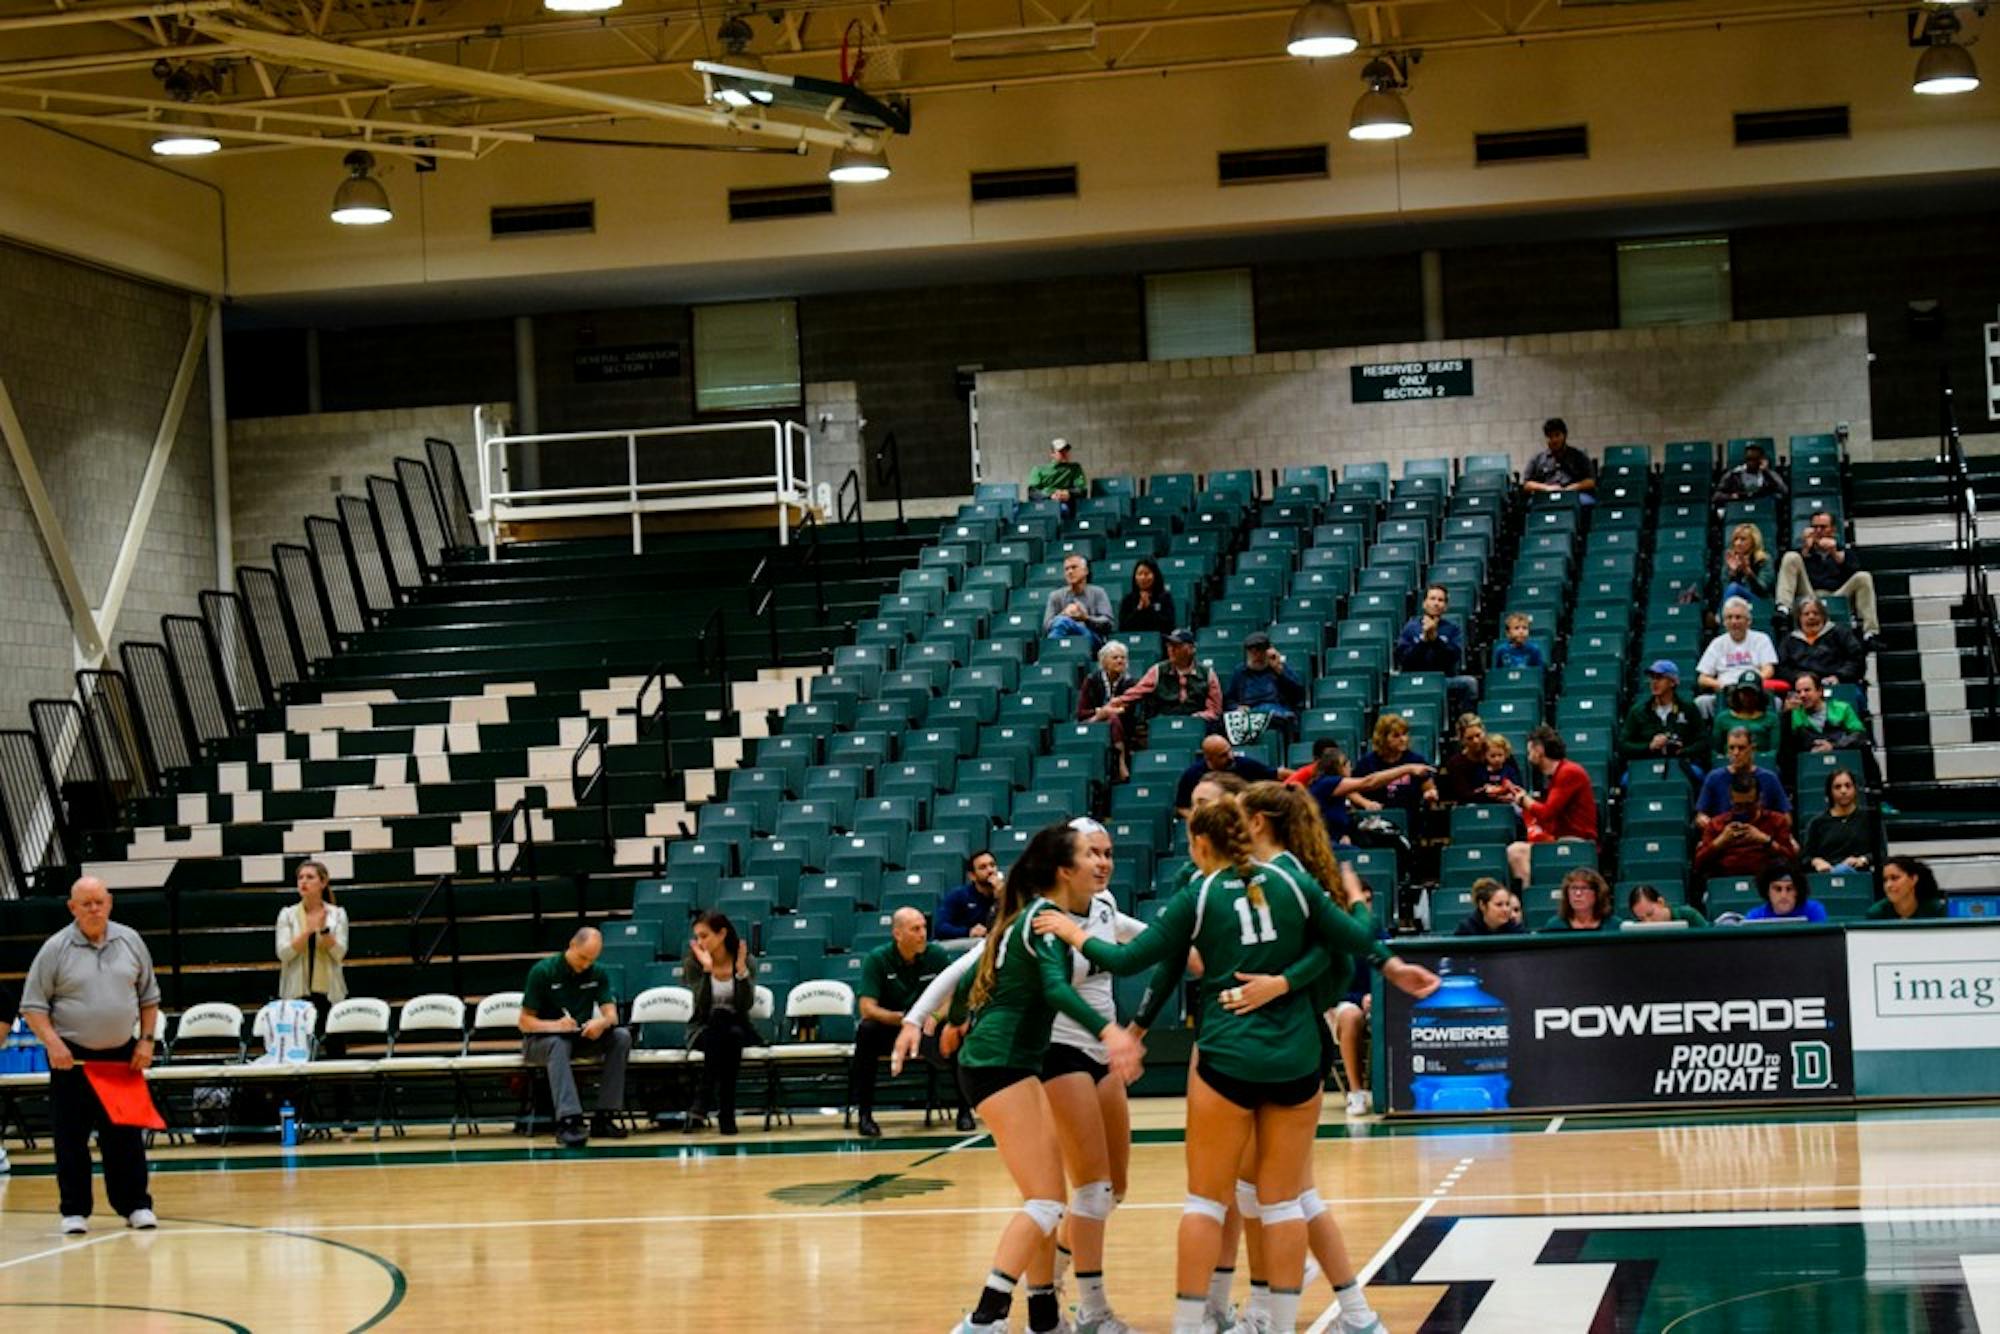 The highlight for many team players was the close five-set victory over Harvard University earlier this season.